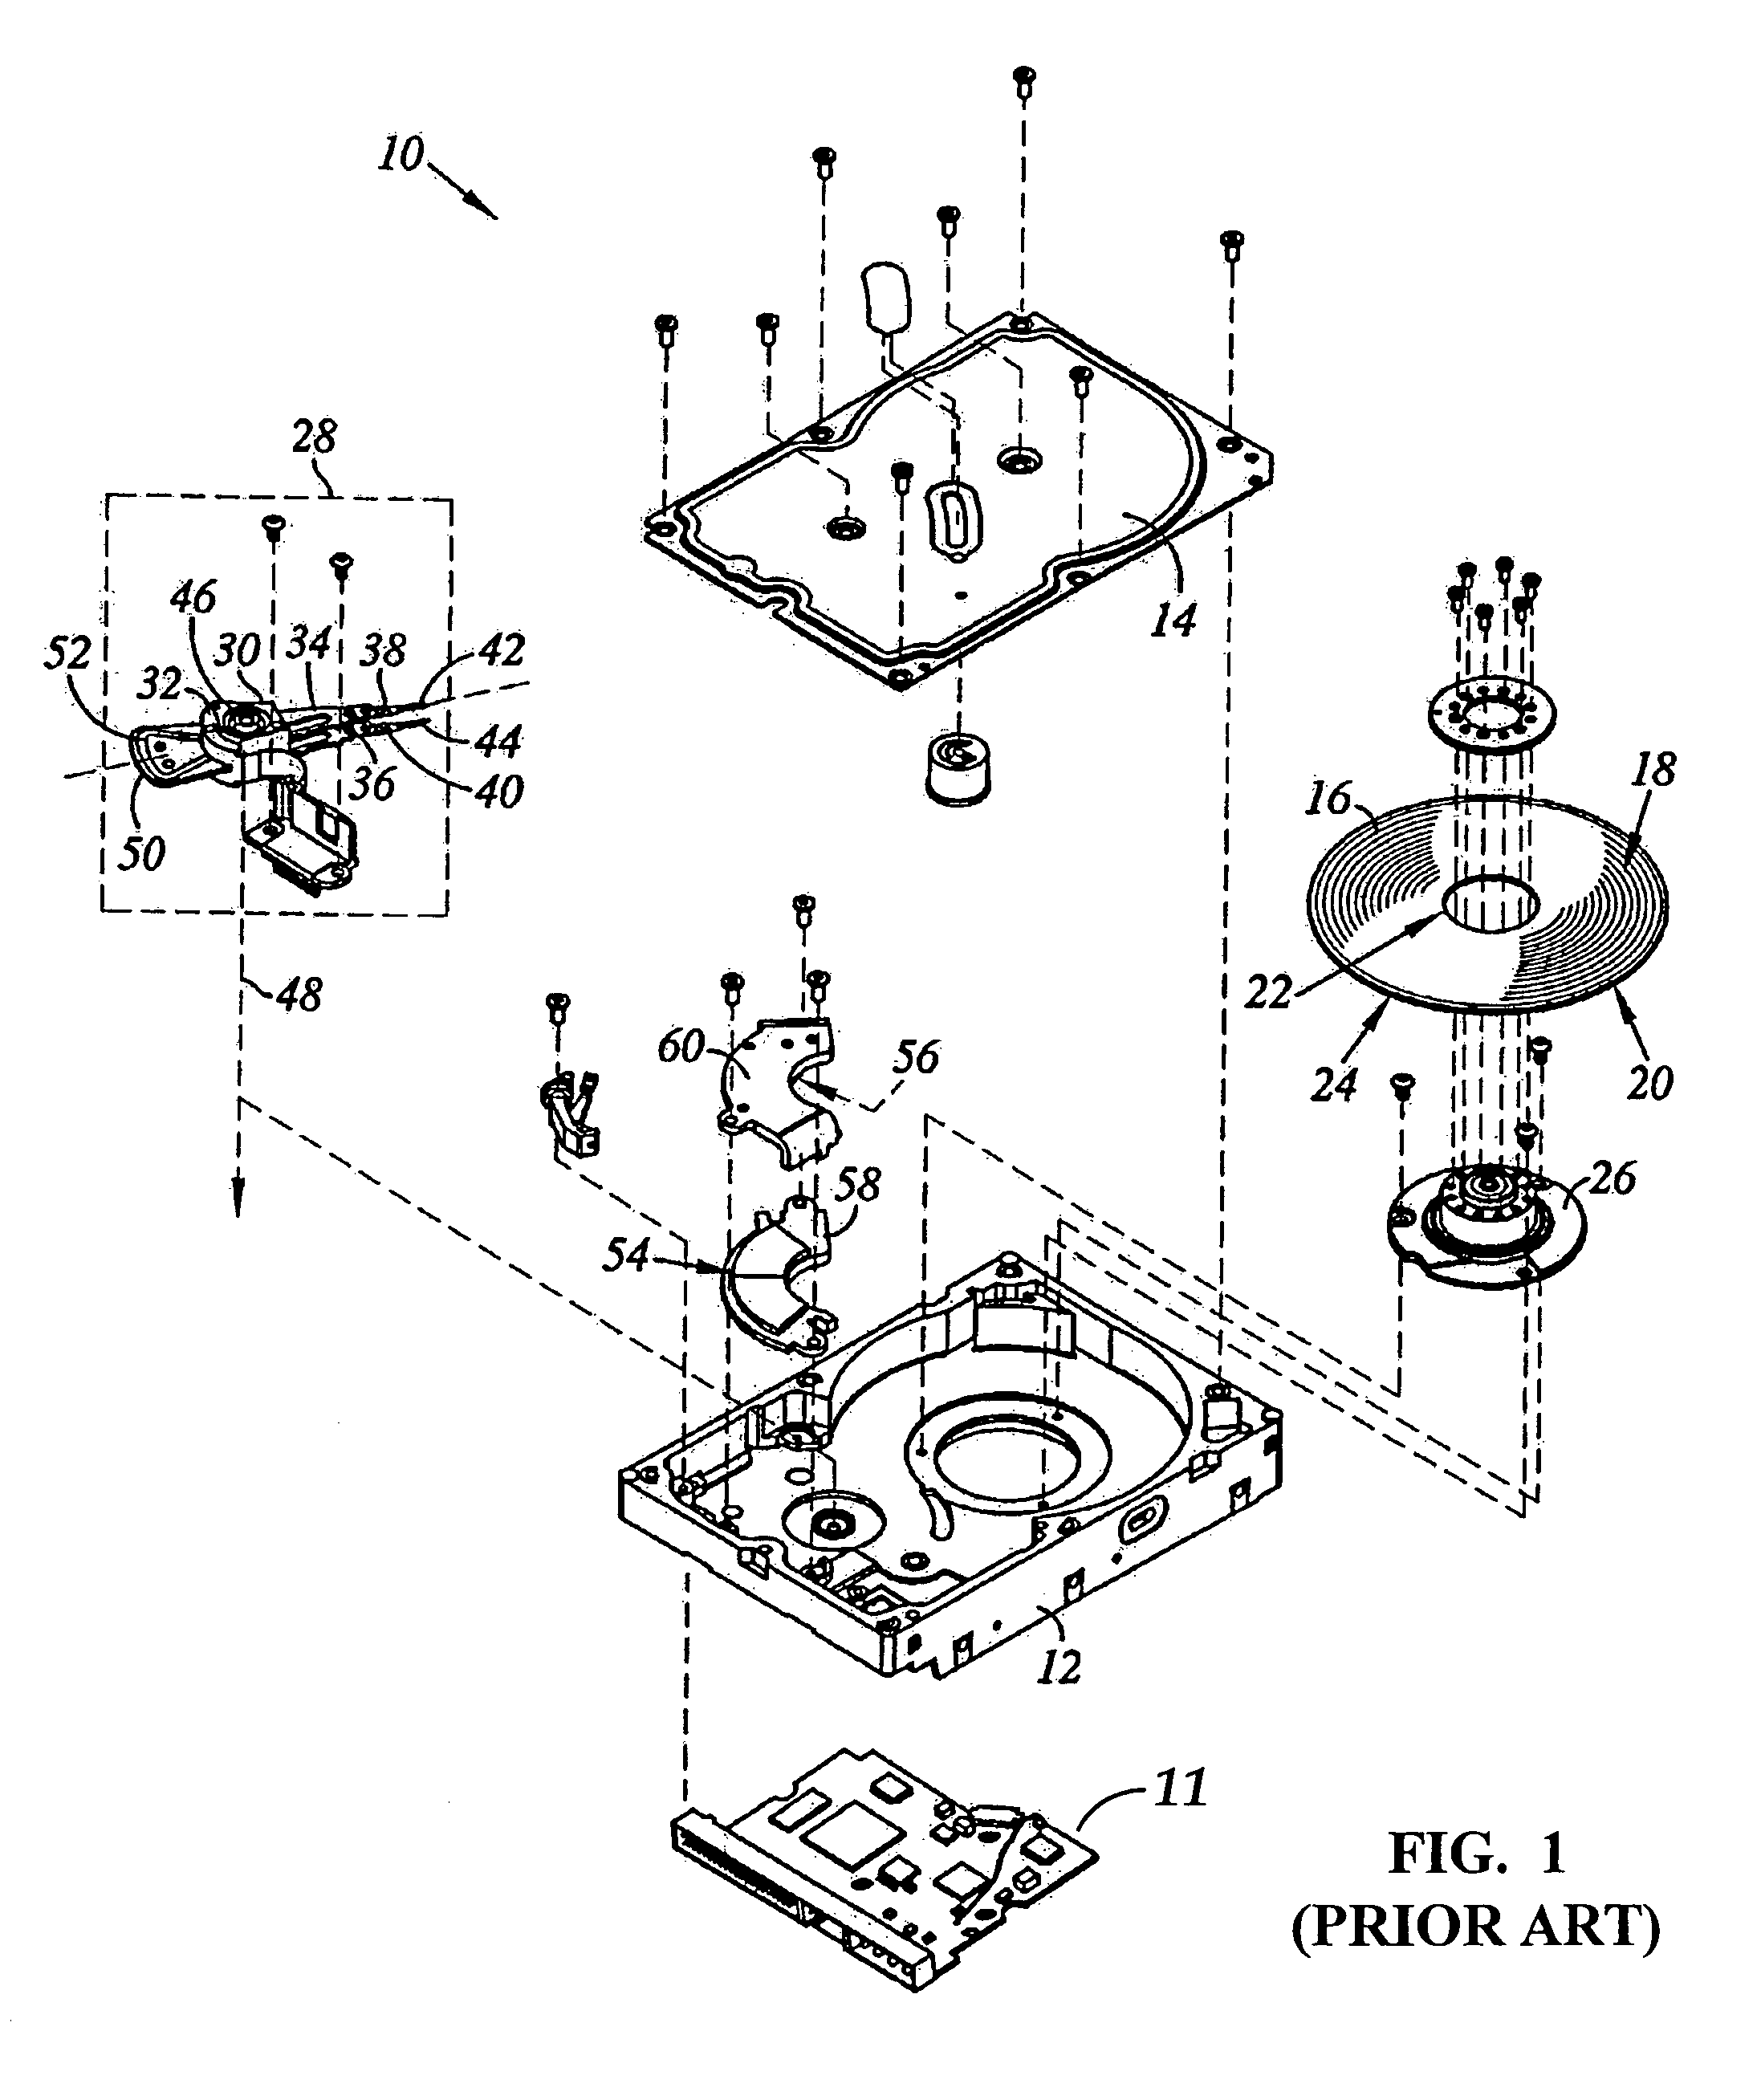 Head gimbal assembly with air bearing slider crown having reduced temperature sensitivity